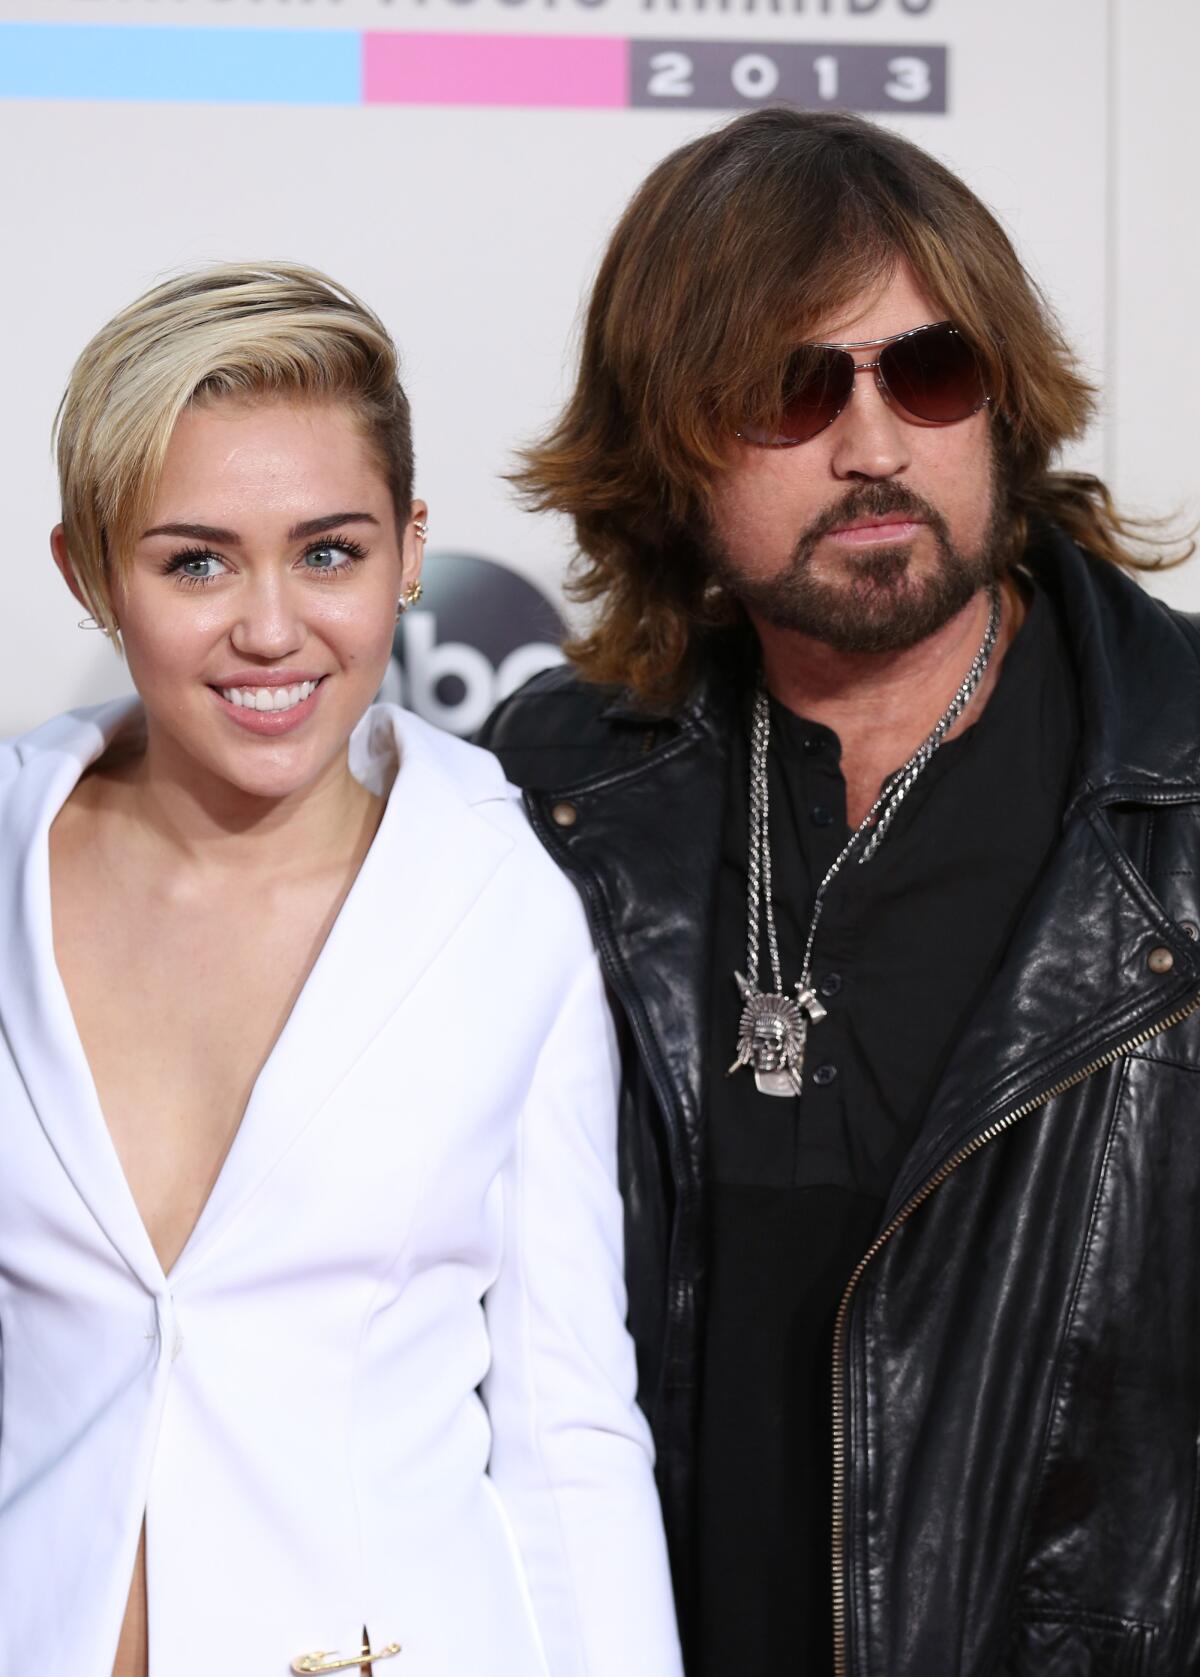 Miley Cyrus with short blond hair and a white suit jacket and Billy Ray Cyrus wearing all black pose in front of backdrop